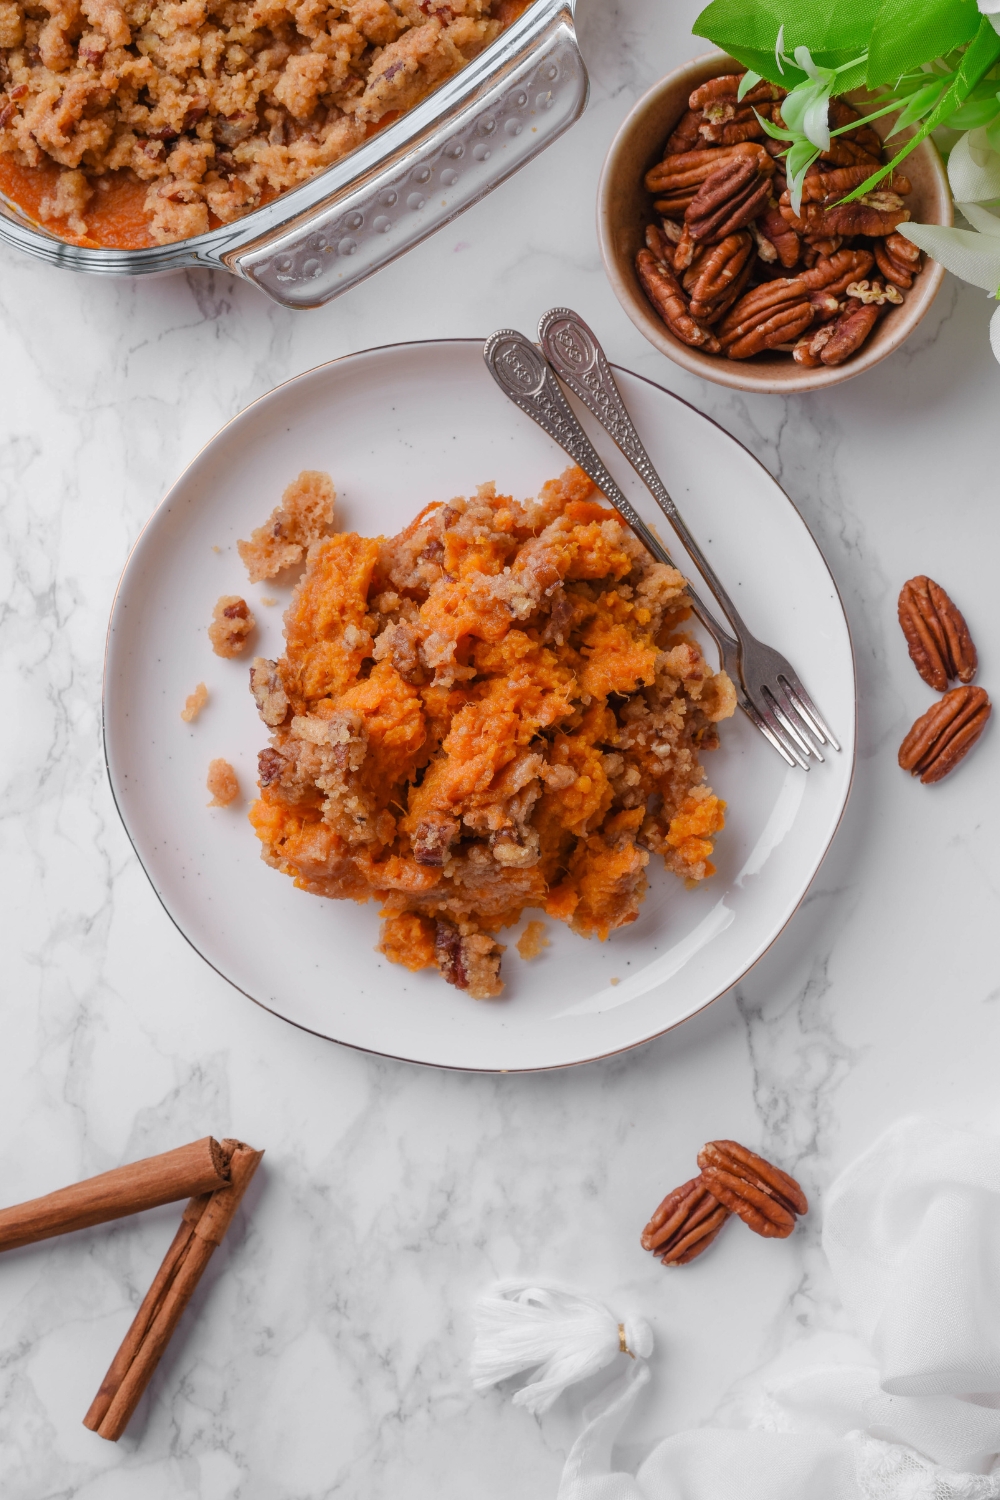 Overhead view of a plate filled with sweet potato casserole mixed with pecans and brown sugar. There are two forks on the plate and a bowl of pecans next to it along with the rest of the casserole.